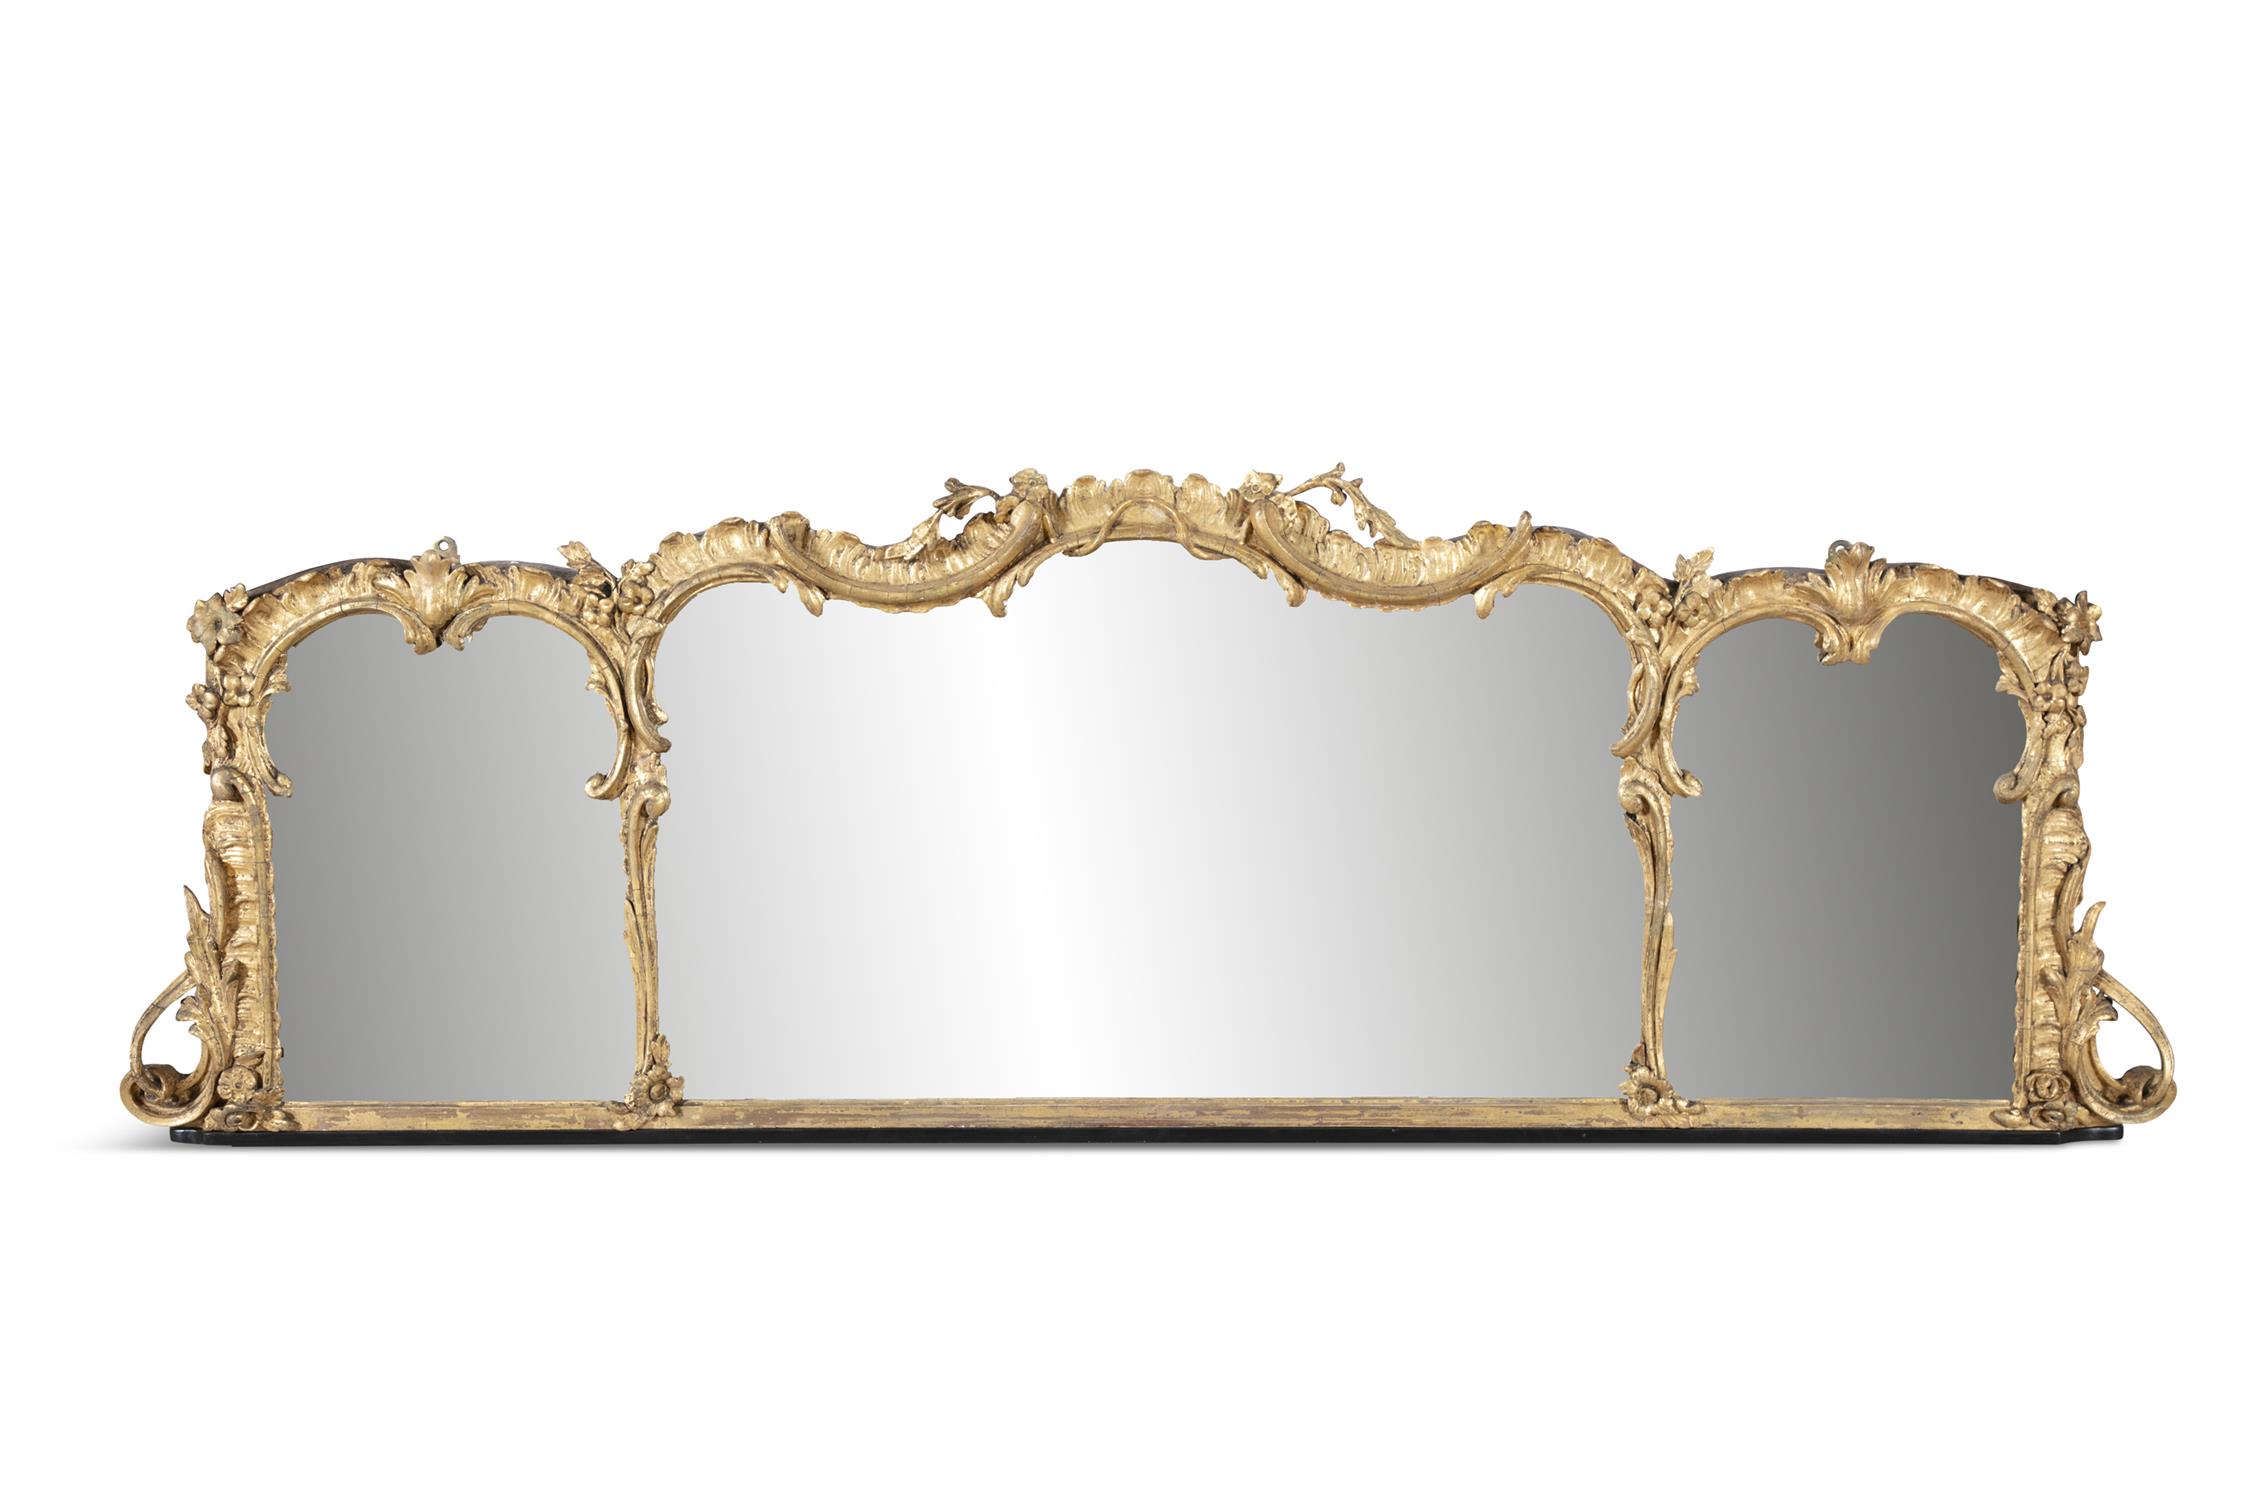 AN 18TH CENTURY ROCOCO GILTWOOD AND GESSO COMPARTMENTAL OVERMANTLE MIRROR, of shaped